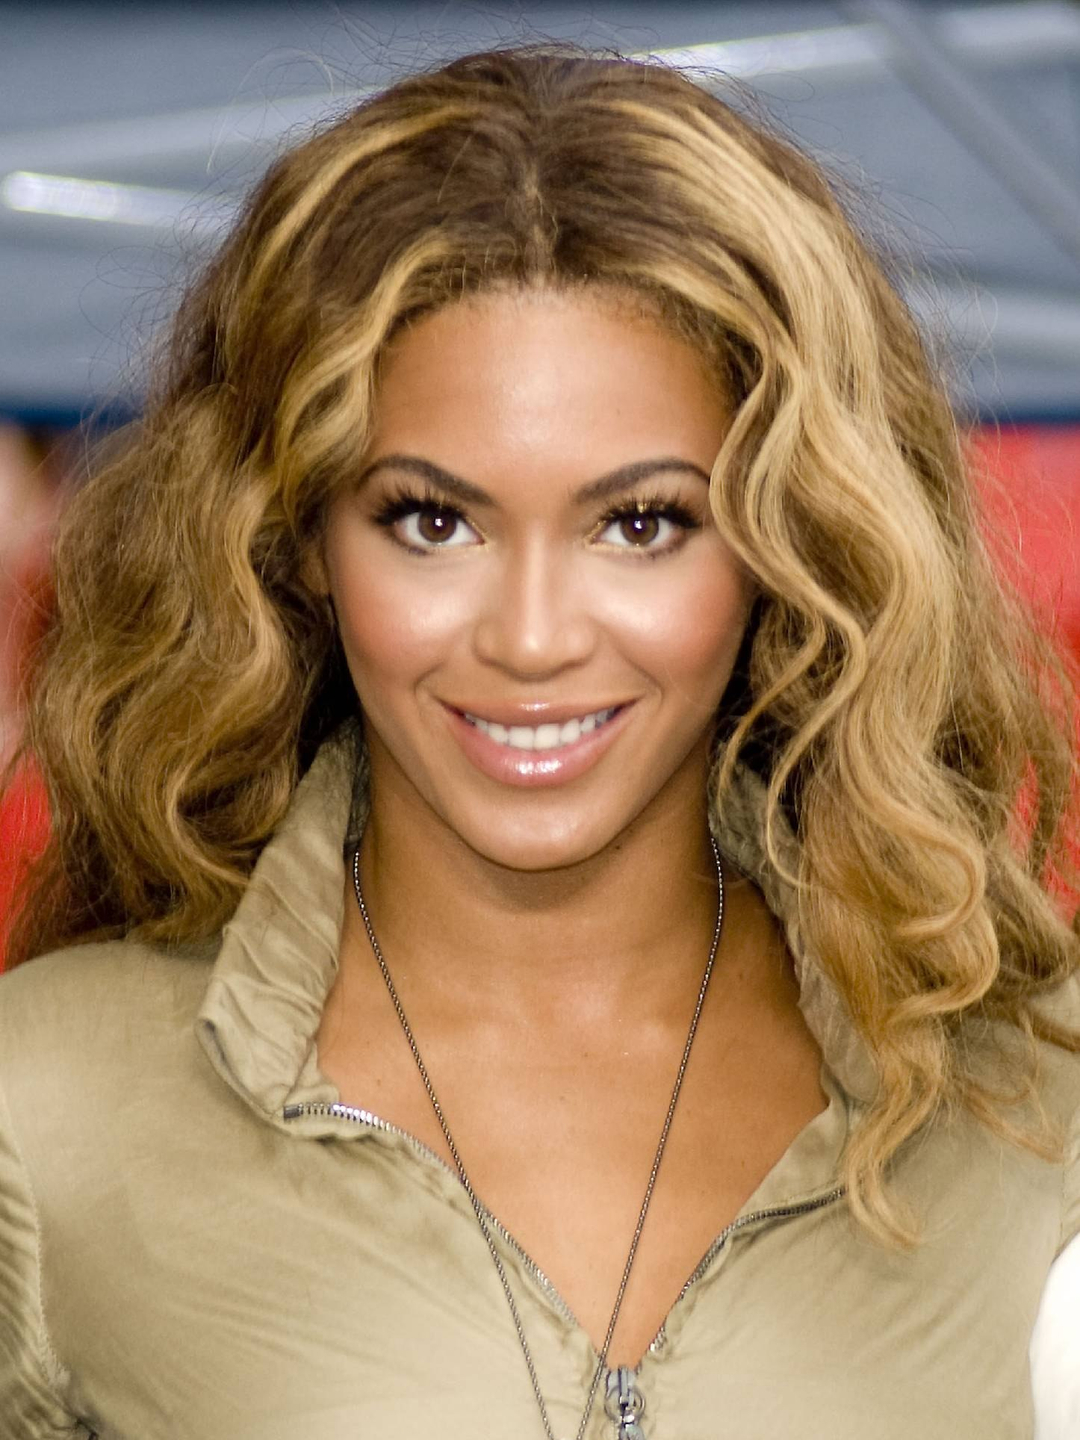 Beyonce story of success